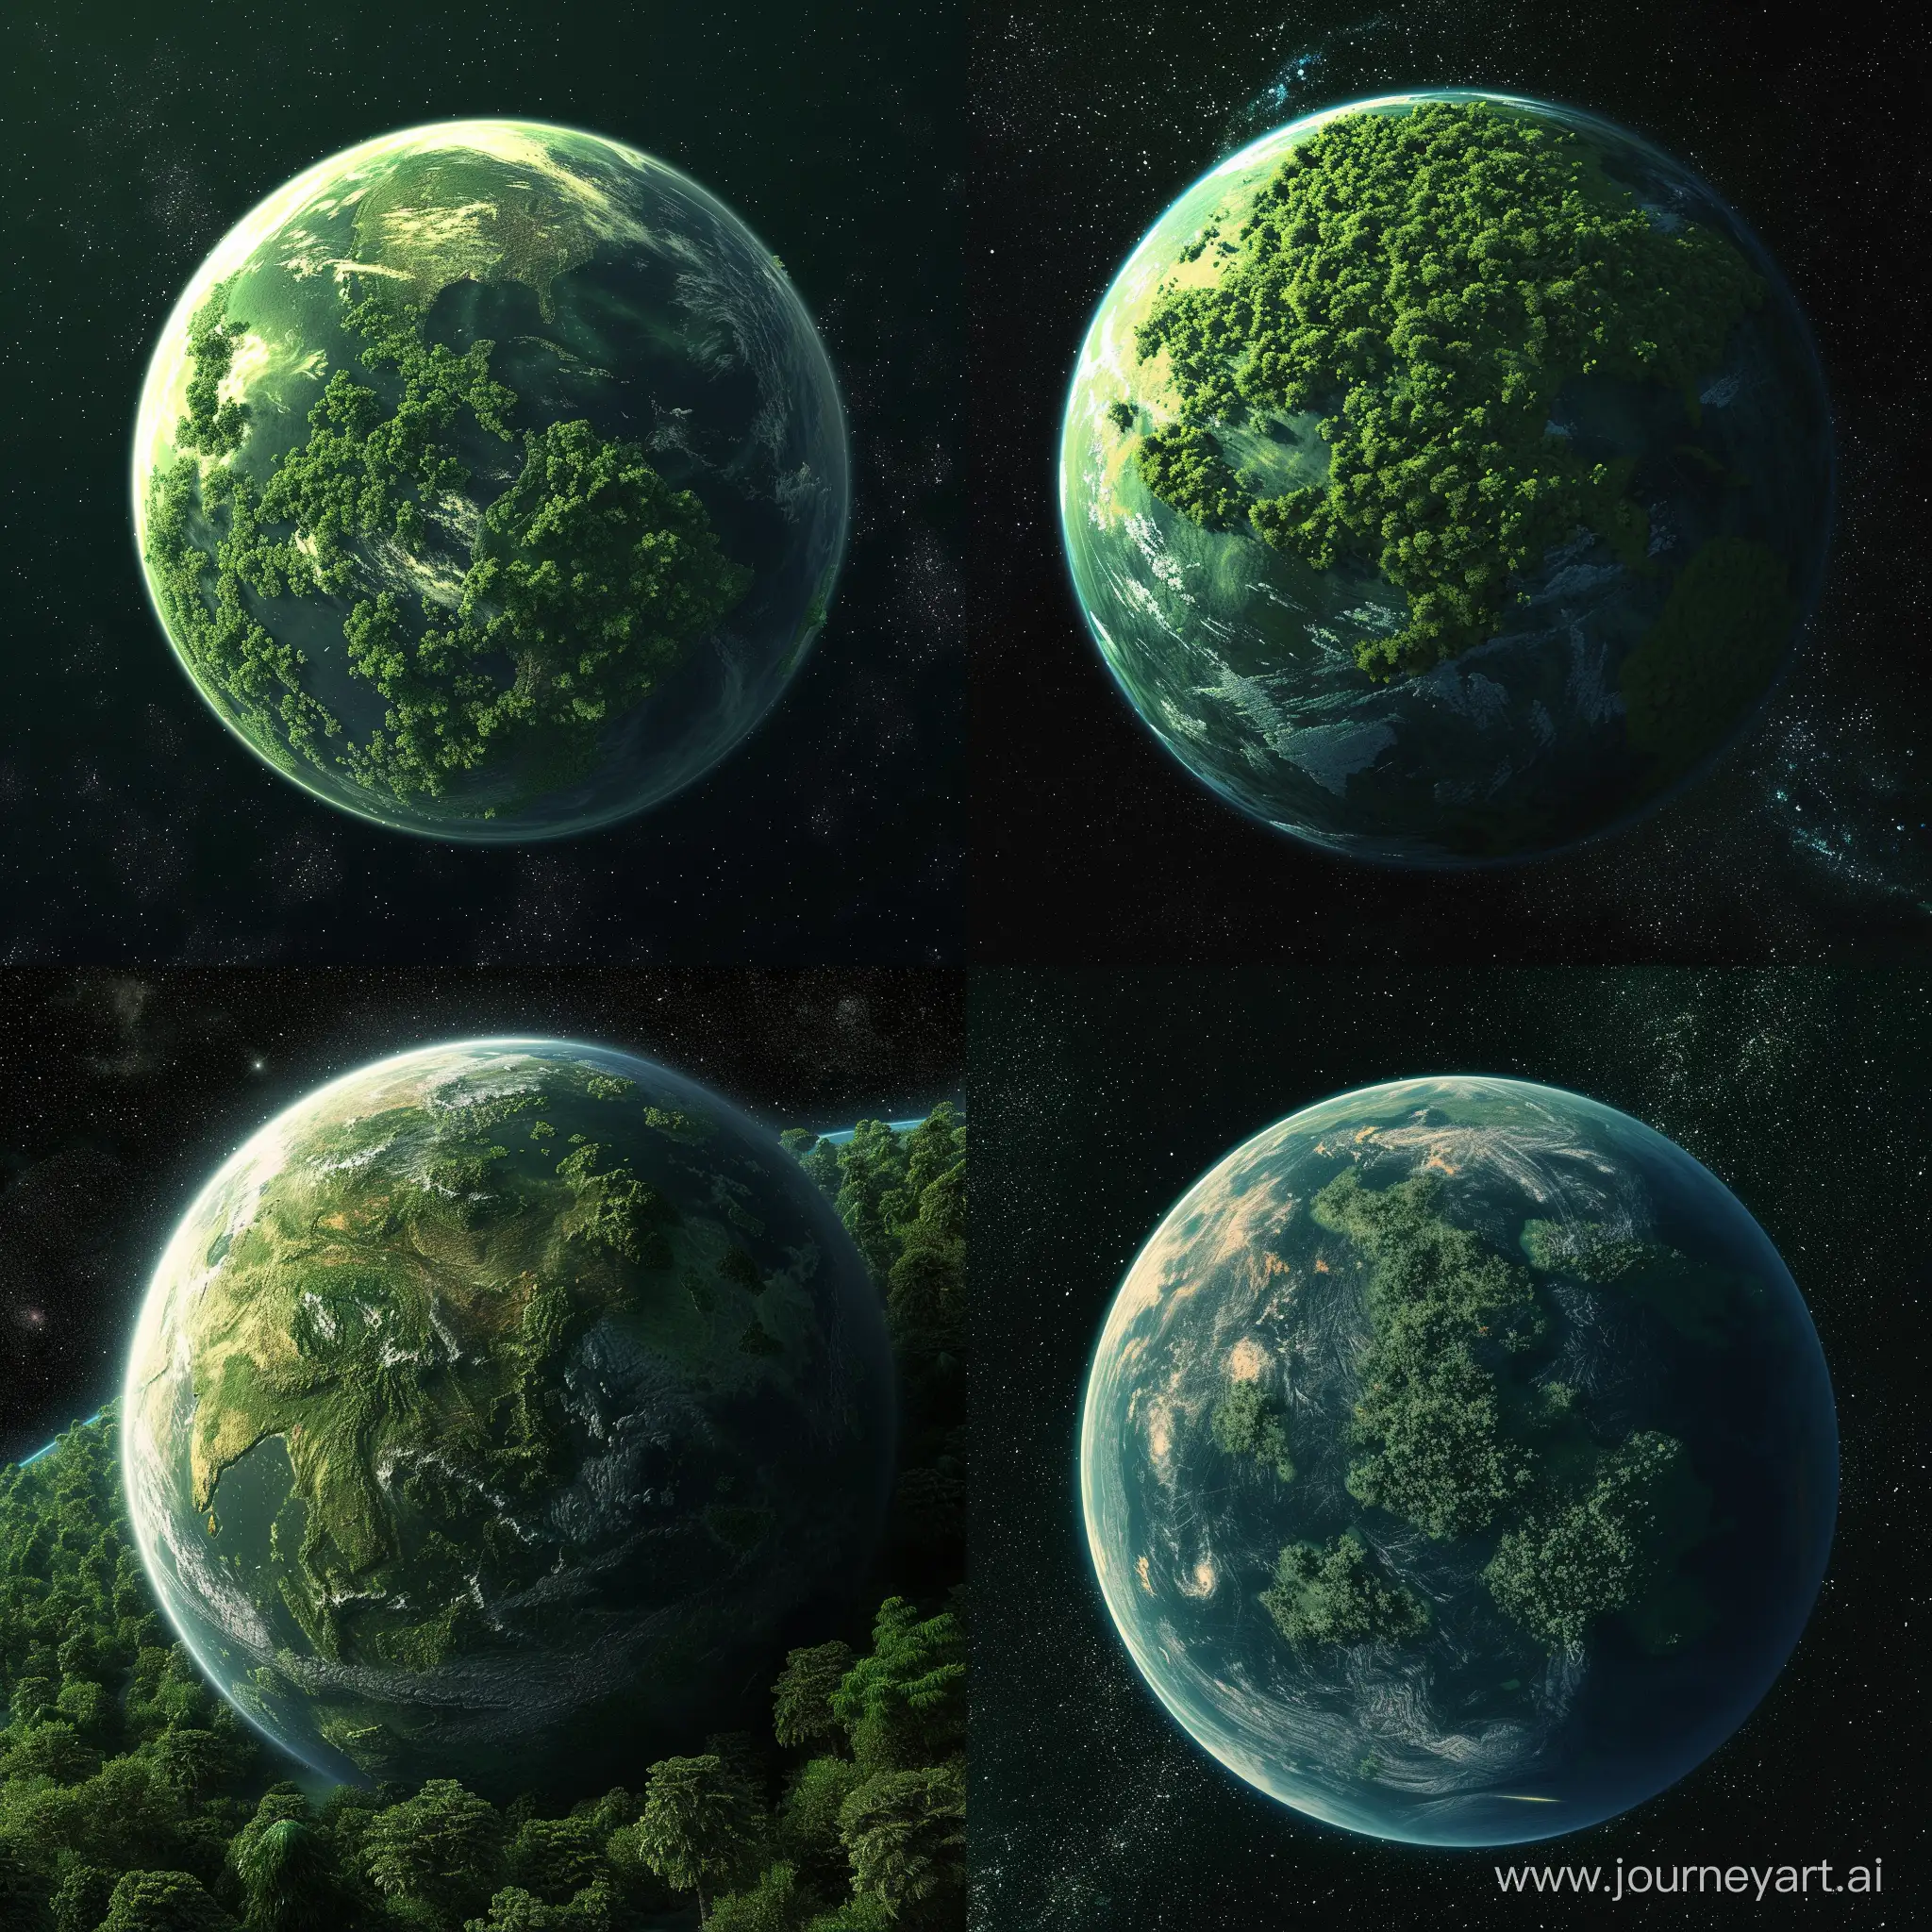 A earth-like planet with a lot of greenery in a galaxy far away
